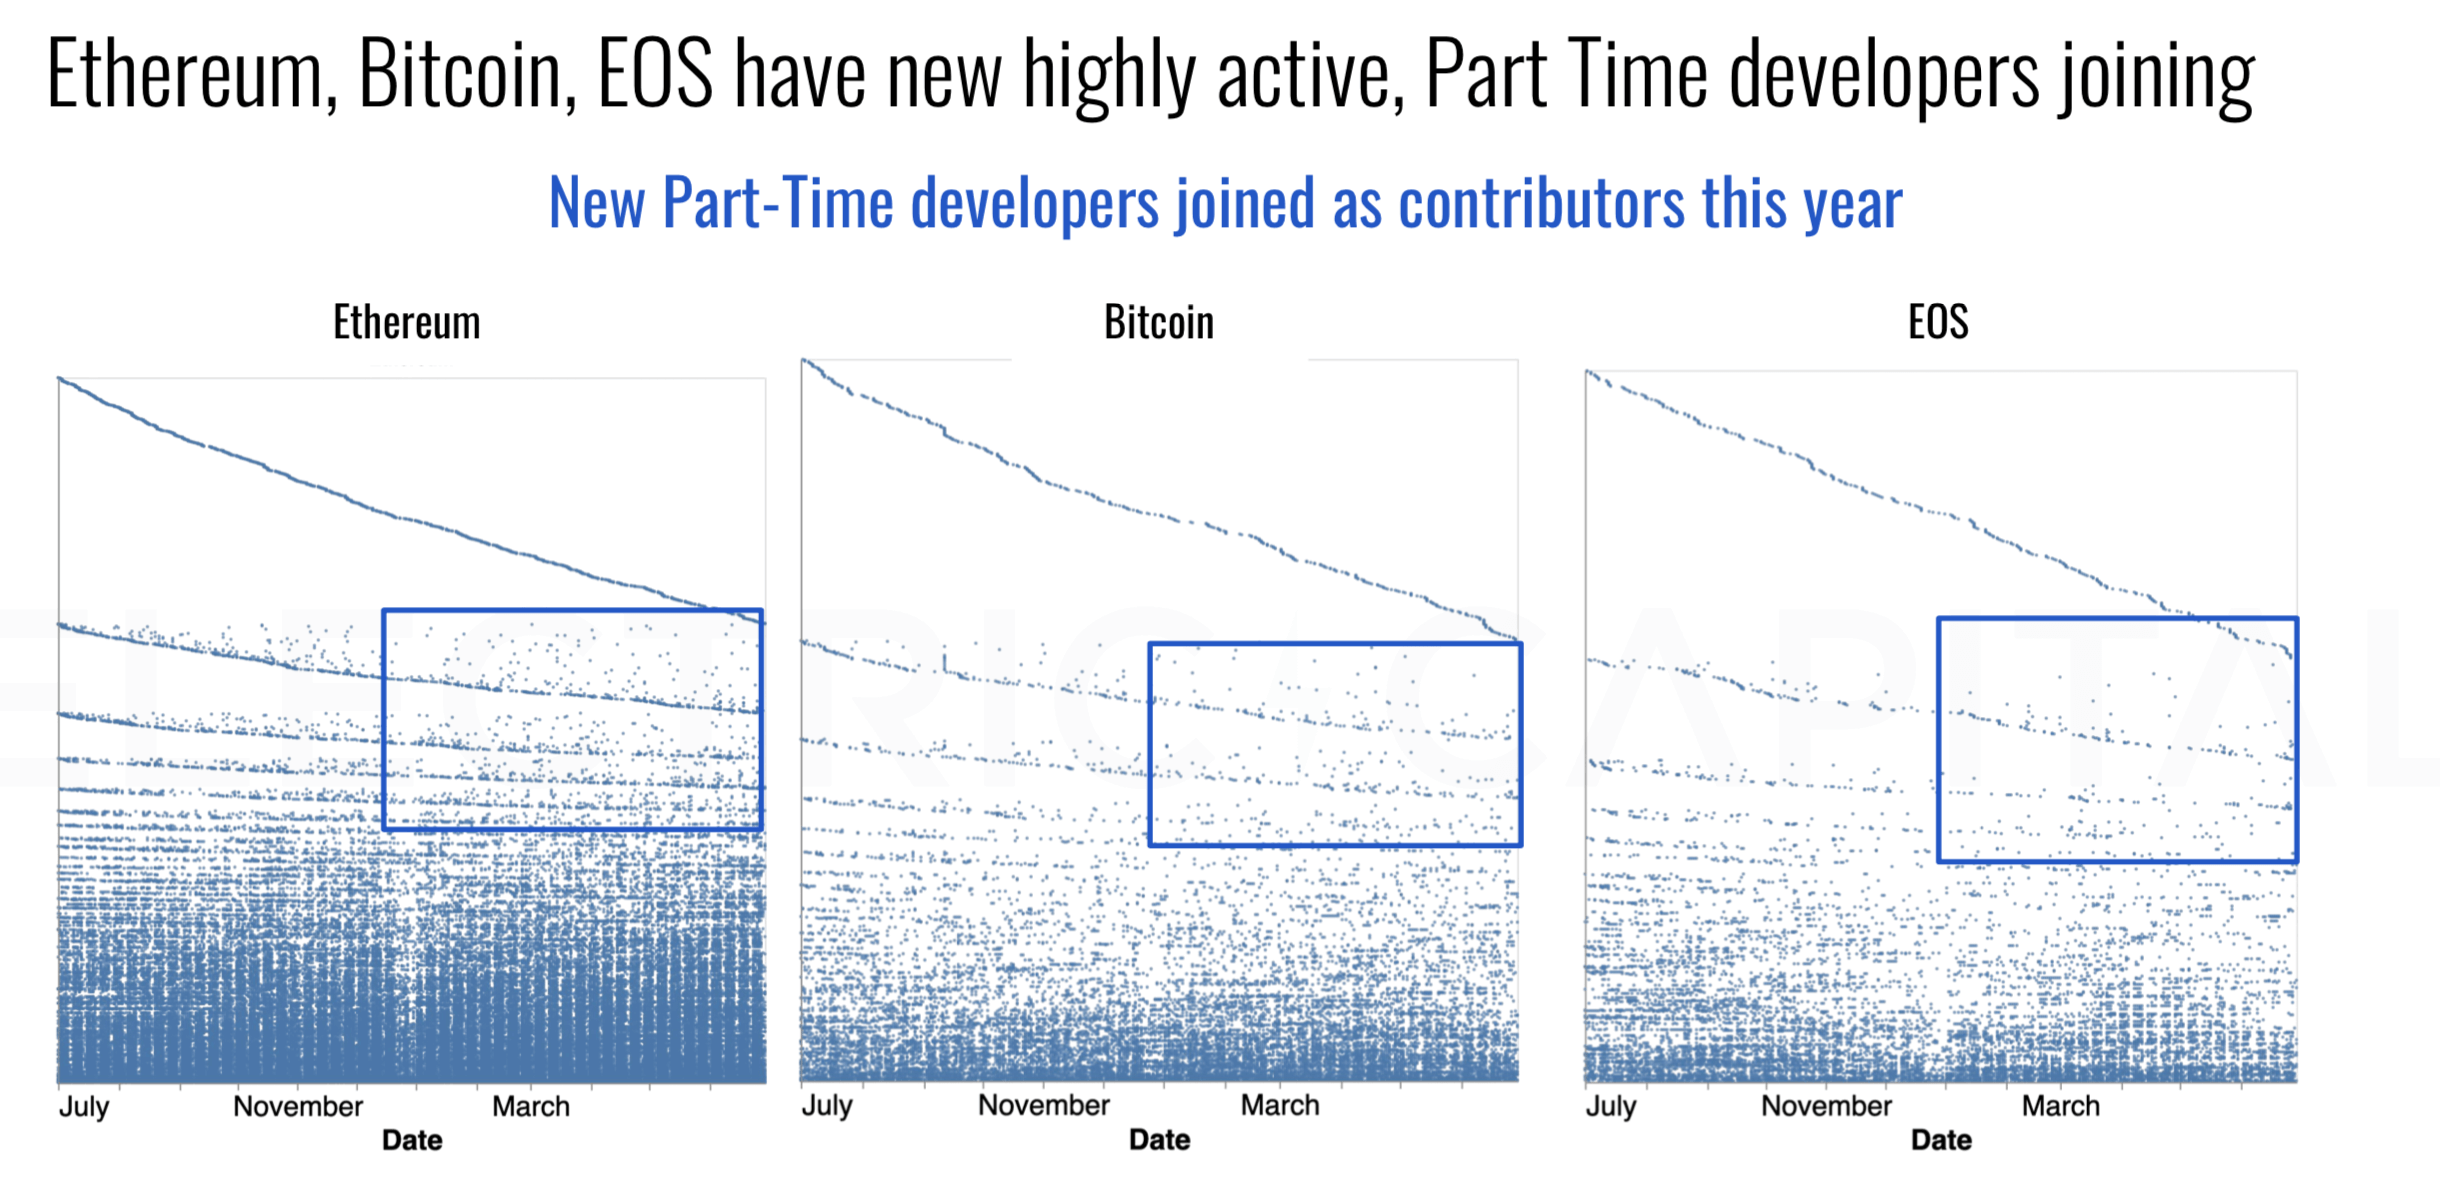 New Part-Time Developers